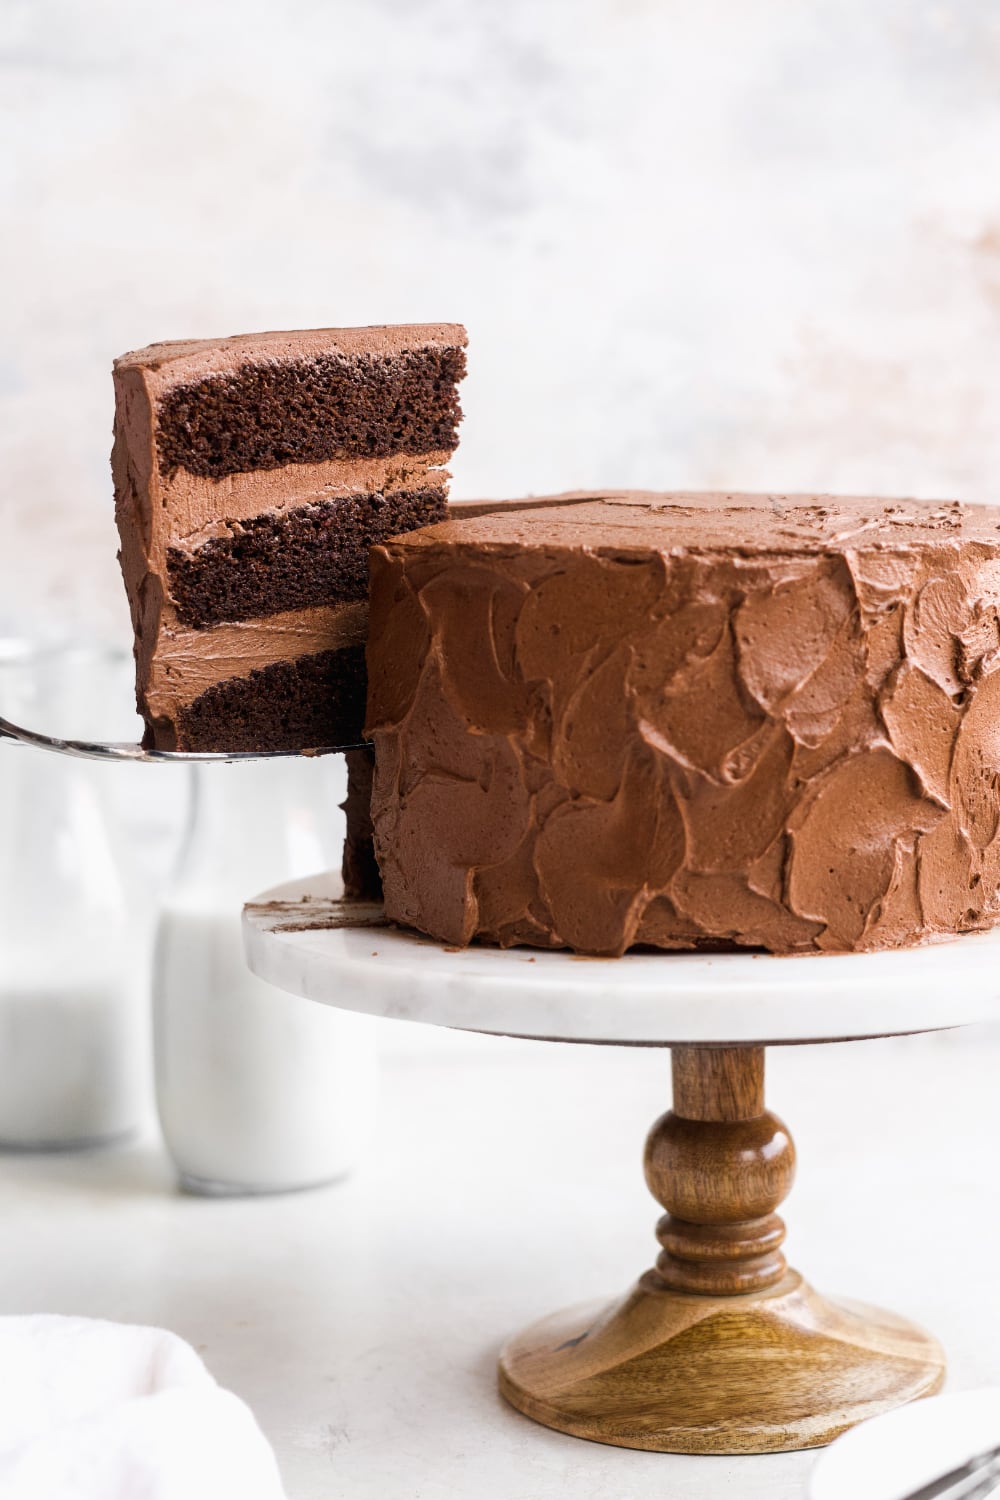 a slice of paleo chocolate cake being lifted from the cake stand